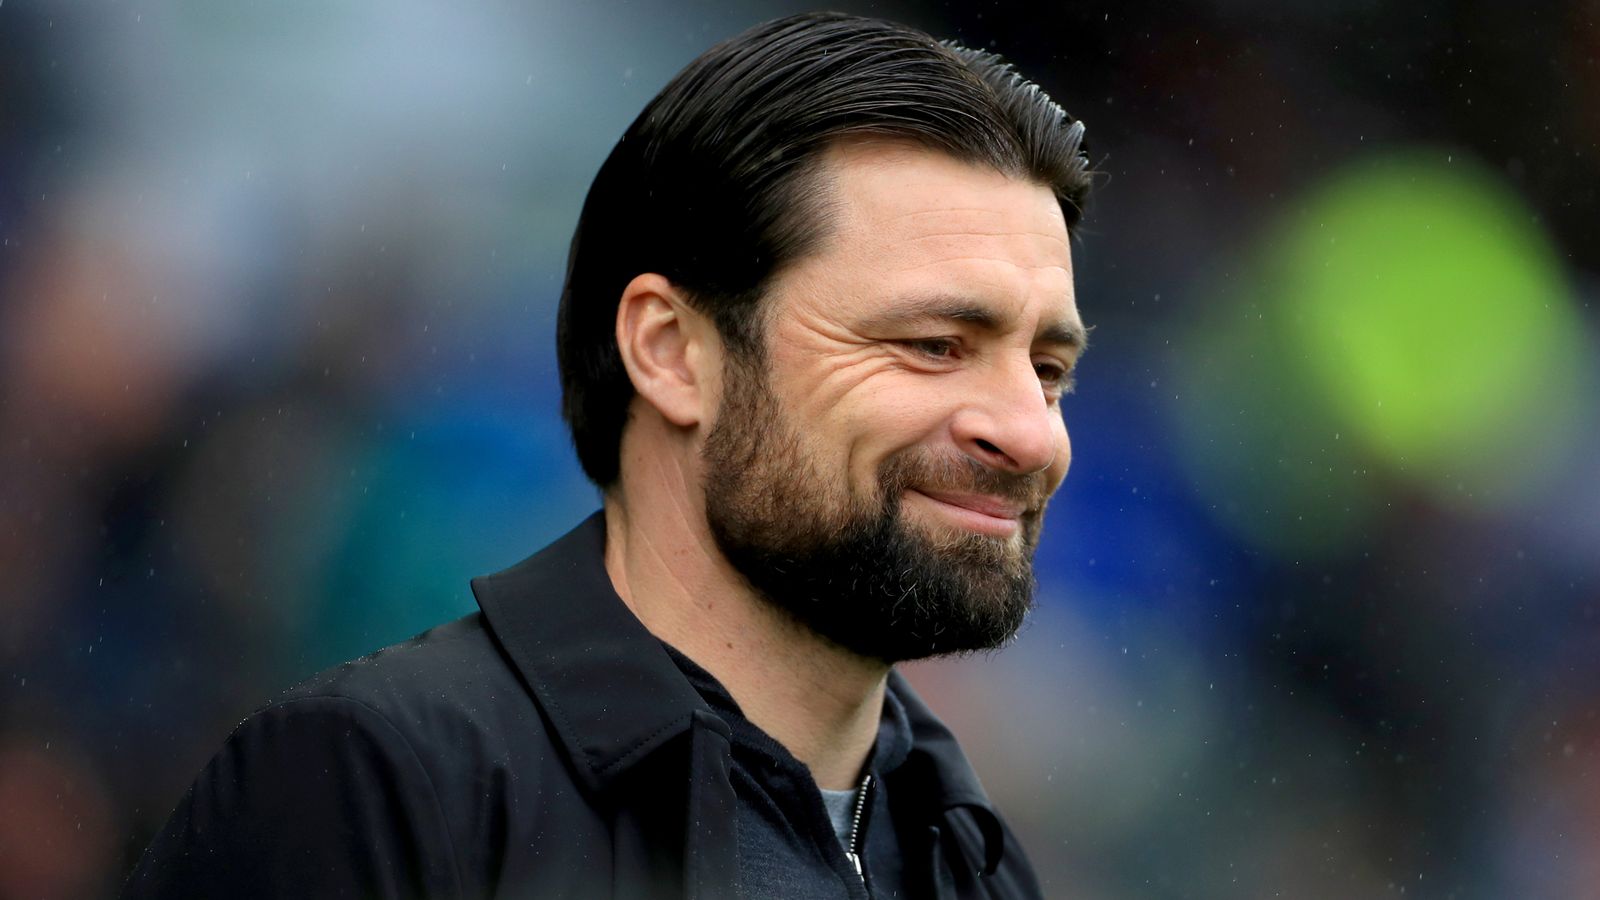 Southampton: Swansea manager Russell Martin one of leading contenders to take over as boss